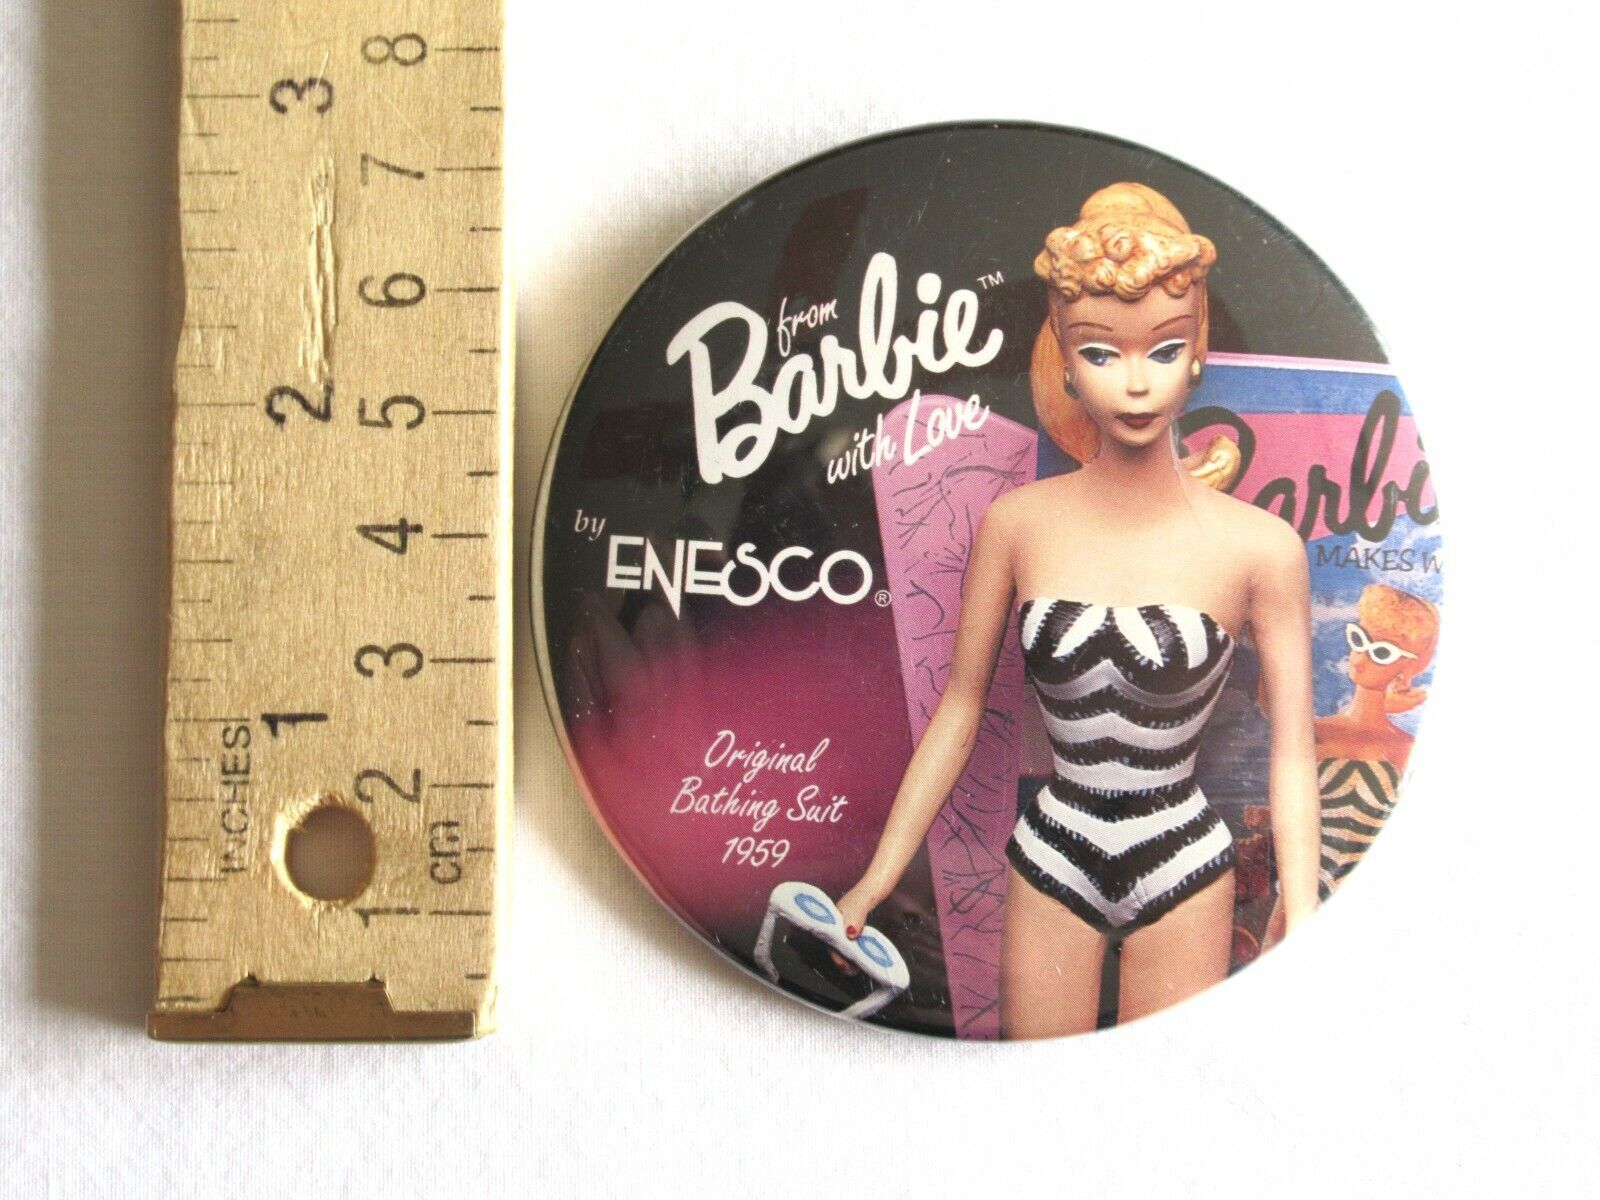 Primary image for From Barbie With Love Enesco 3'' Button Original Bathing Suit 1995 Doll Pinback